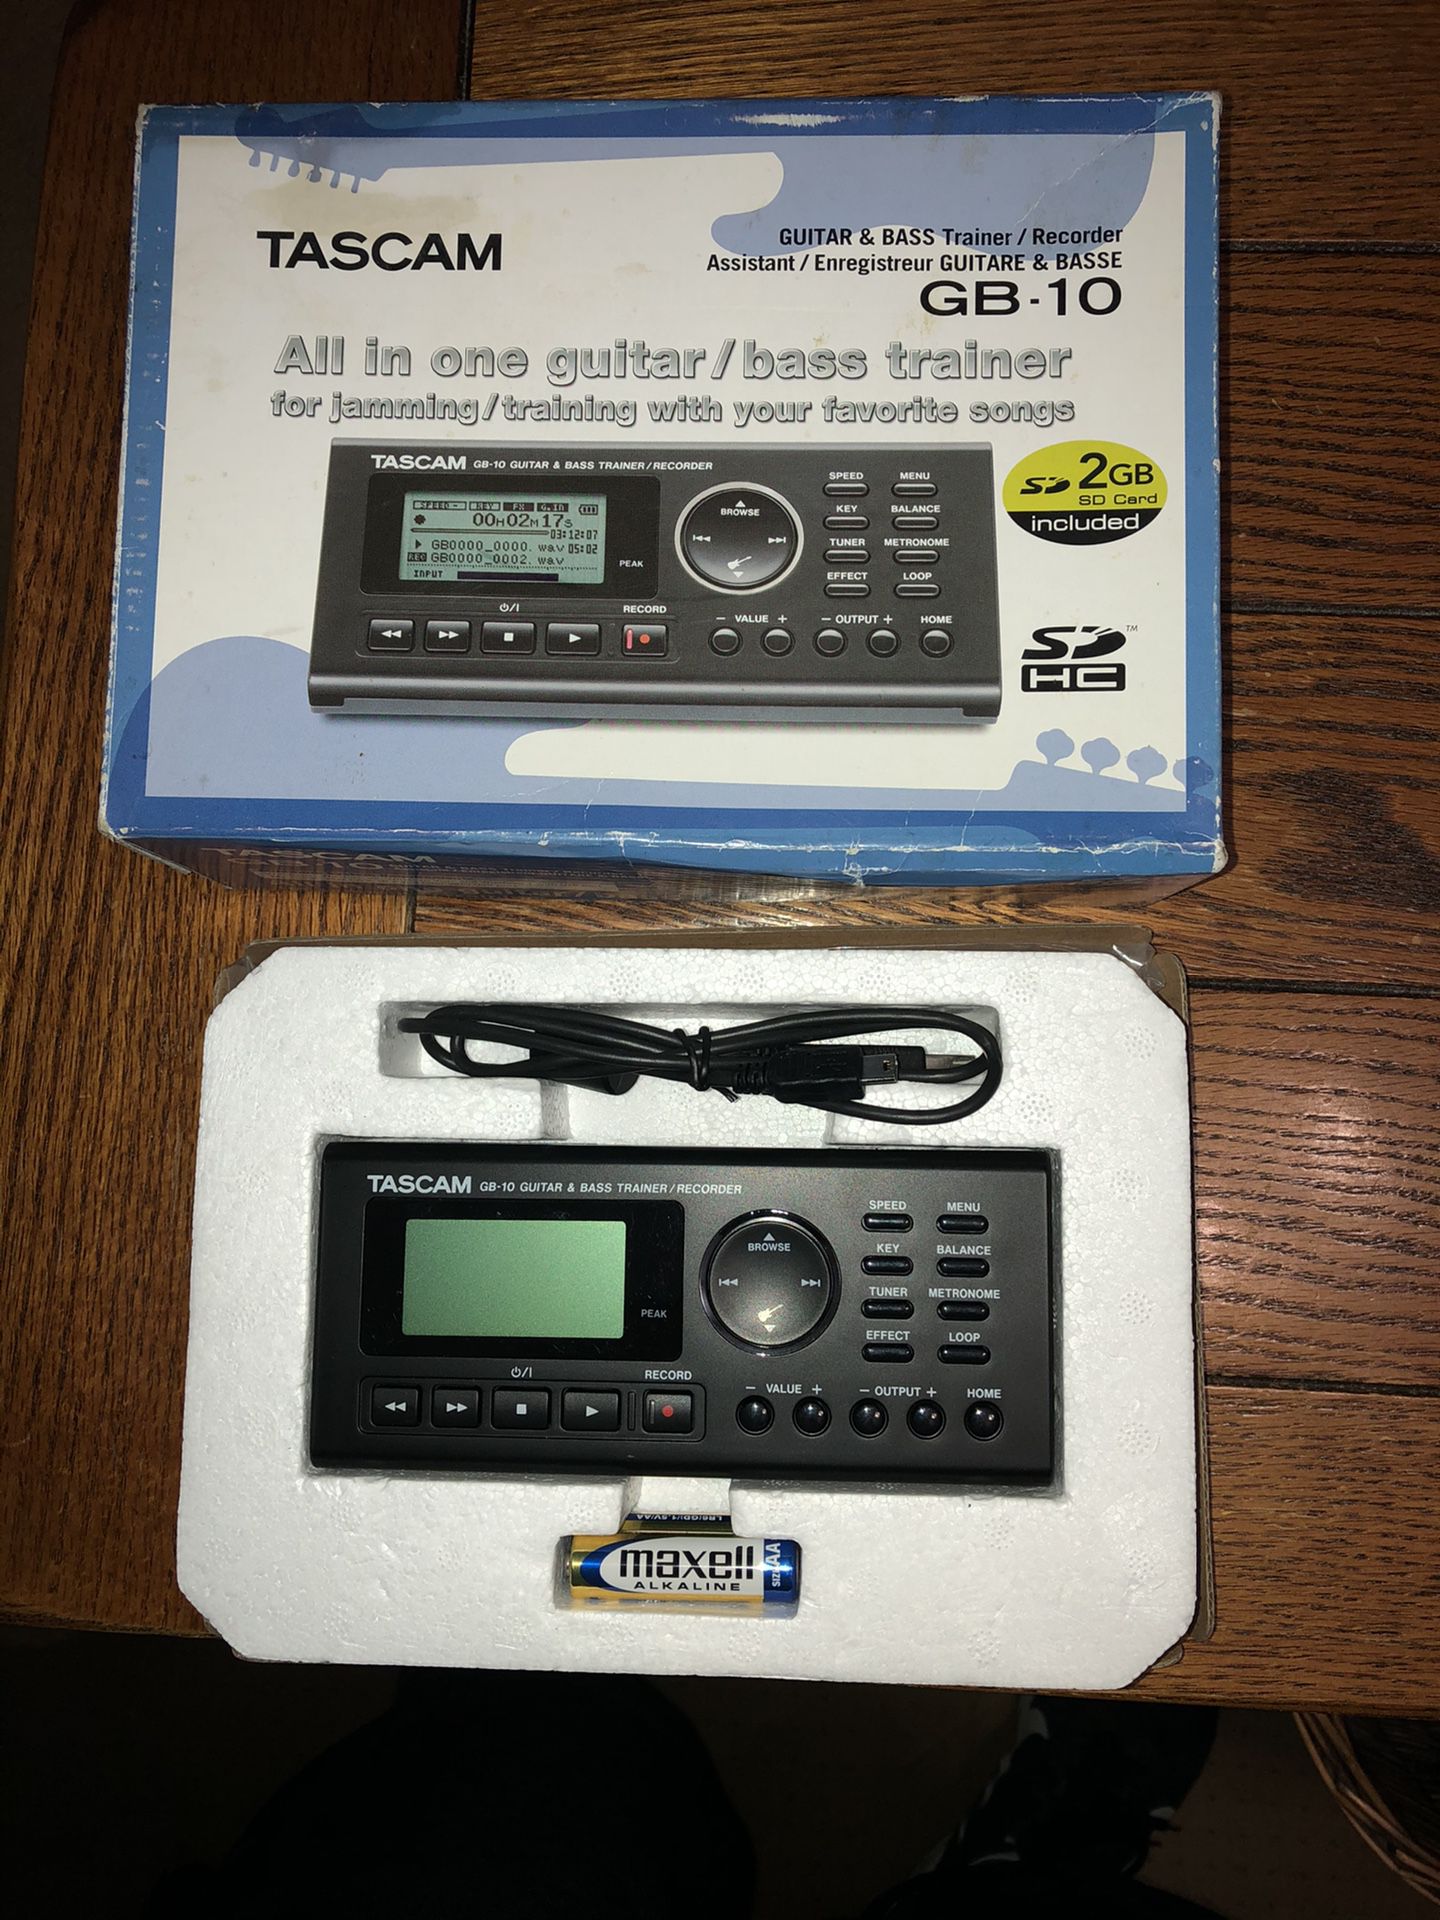 Tascam GB-10 All in 1 guitar/bass trainer